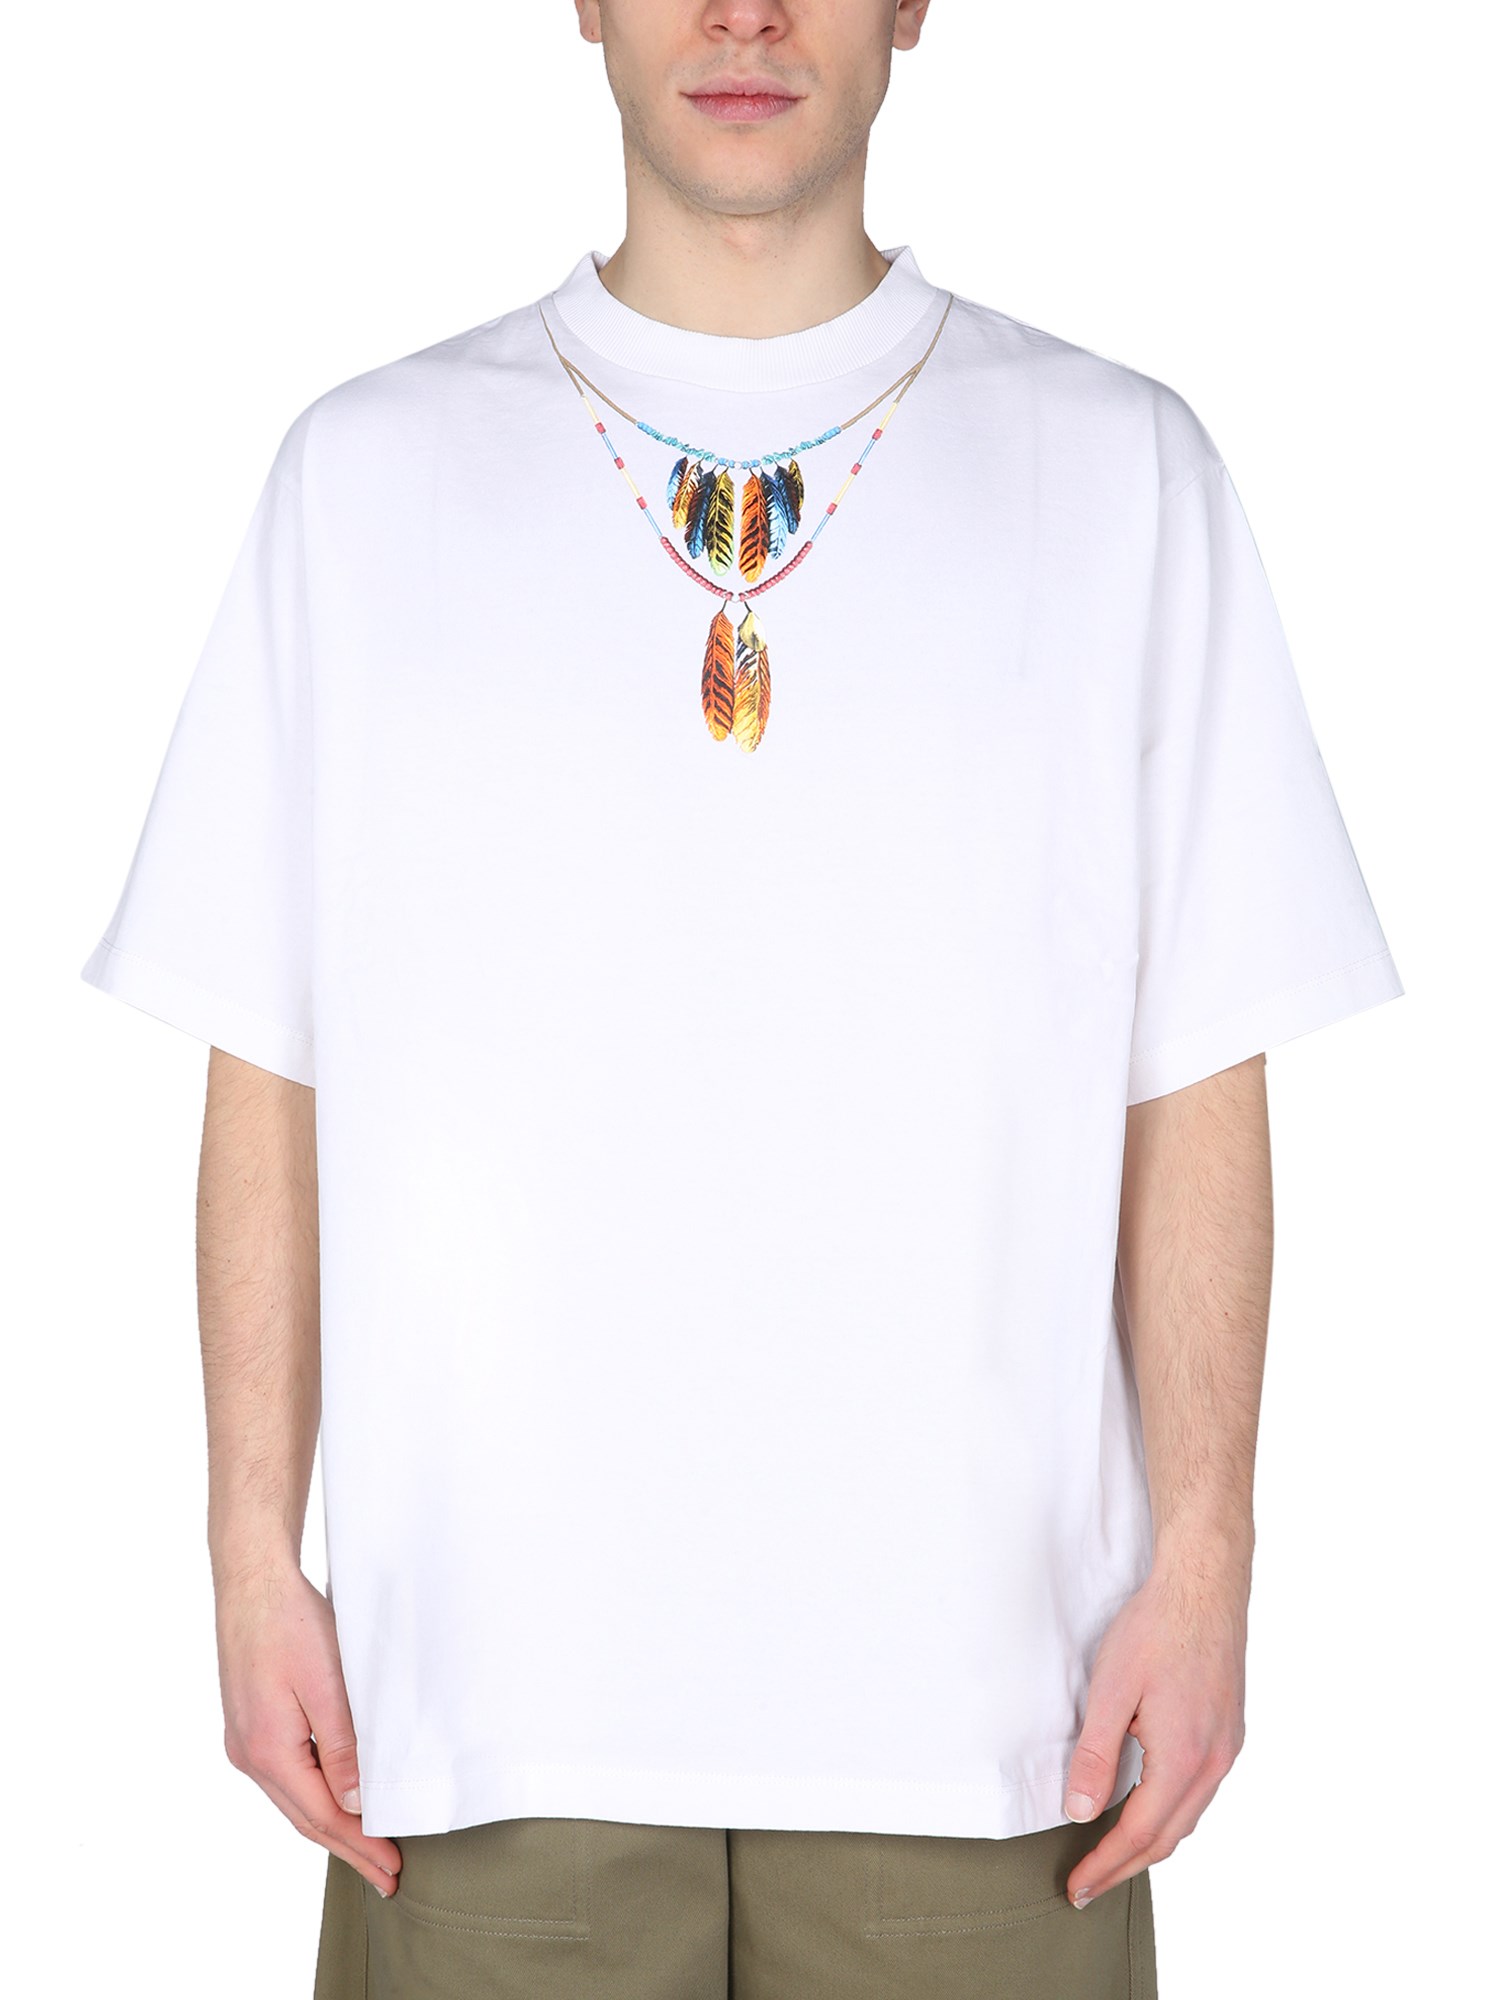 marcelo burlon county of milan "feathers necklace" t-shirt